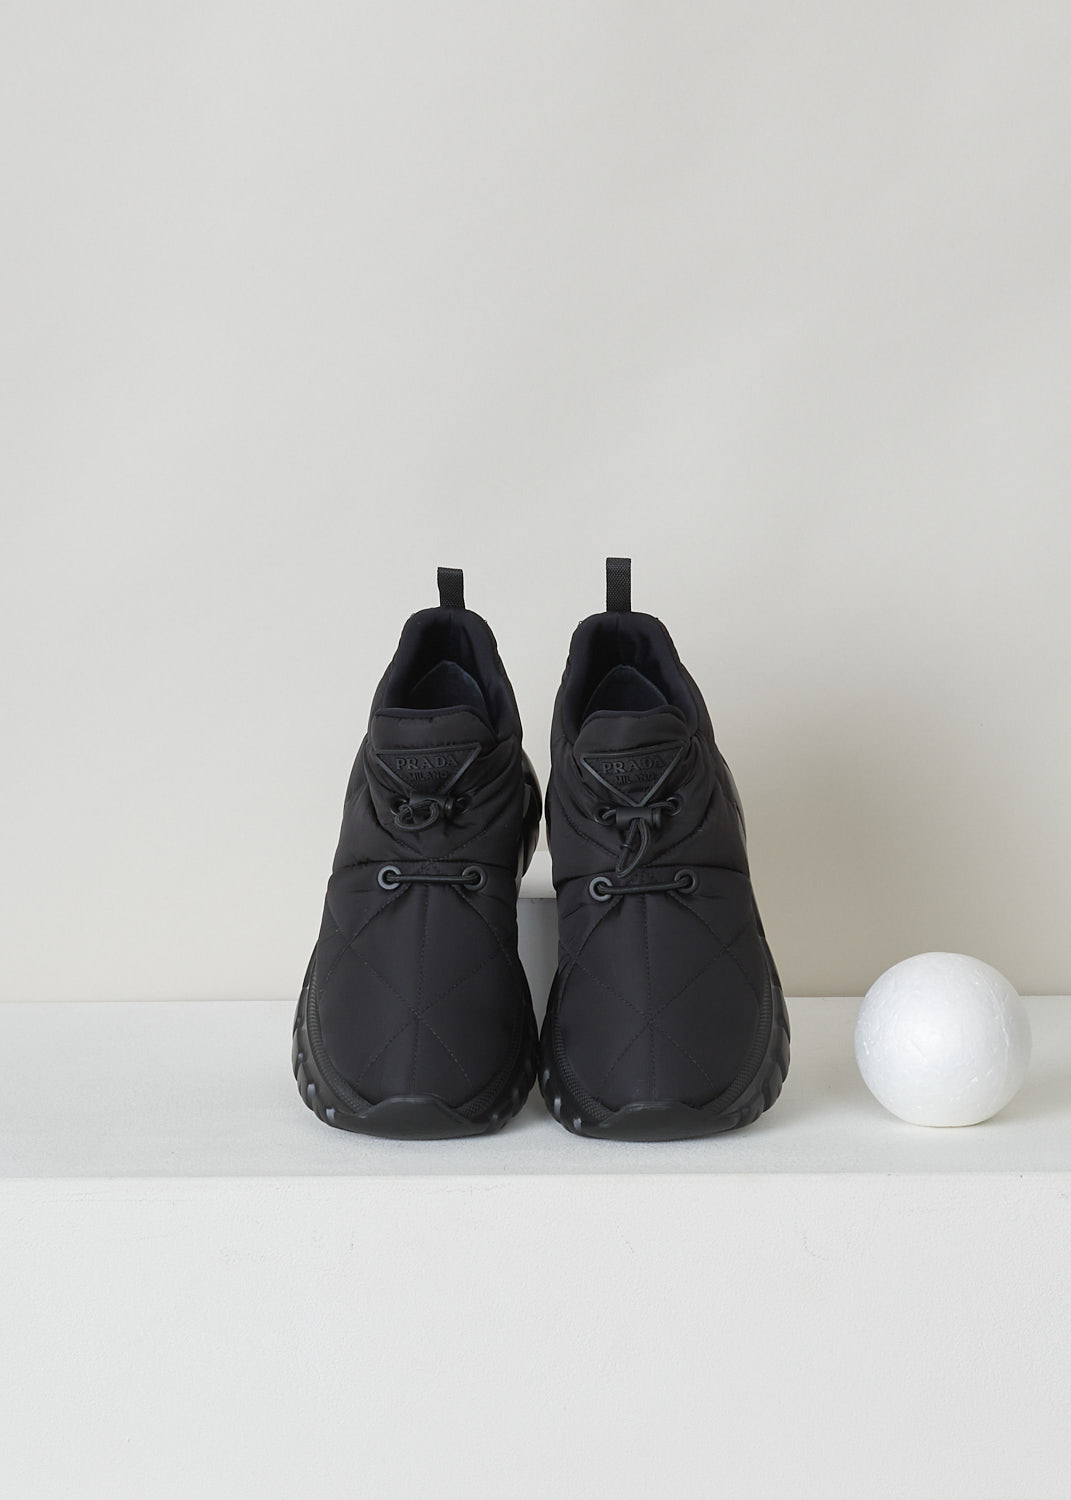 PRADA, BLACK PADDED NYLON SNEAKERS, 1E741M_3LGO_F0002_NYLON_PIUMA_NERO, Black, Top, These black padded slip-on shoes feature the brand's triangle logo in black on the front above the toggle fastening. The shoes have ribbed rubber soles.

